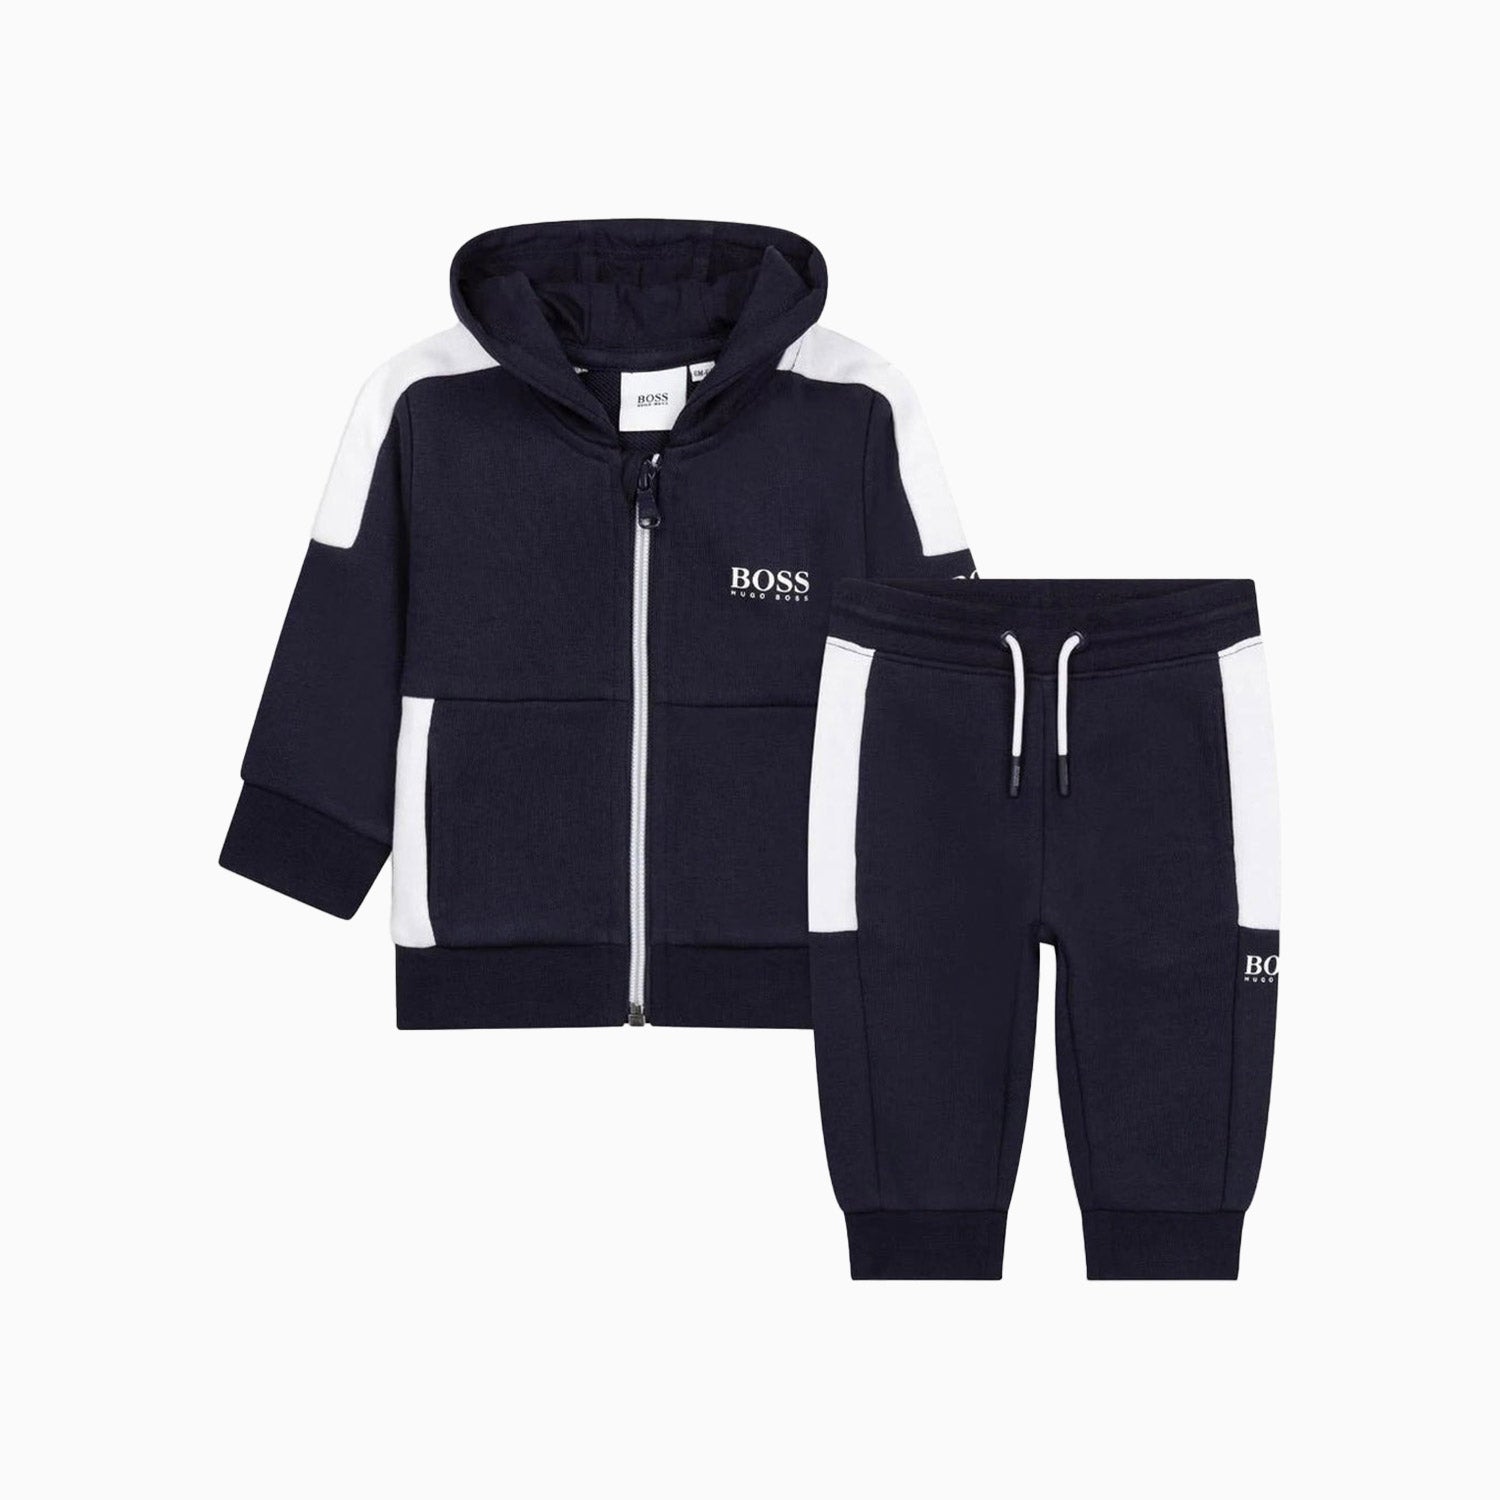 hugo-boss-kids-french-terry-track-suit-j08064-849